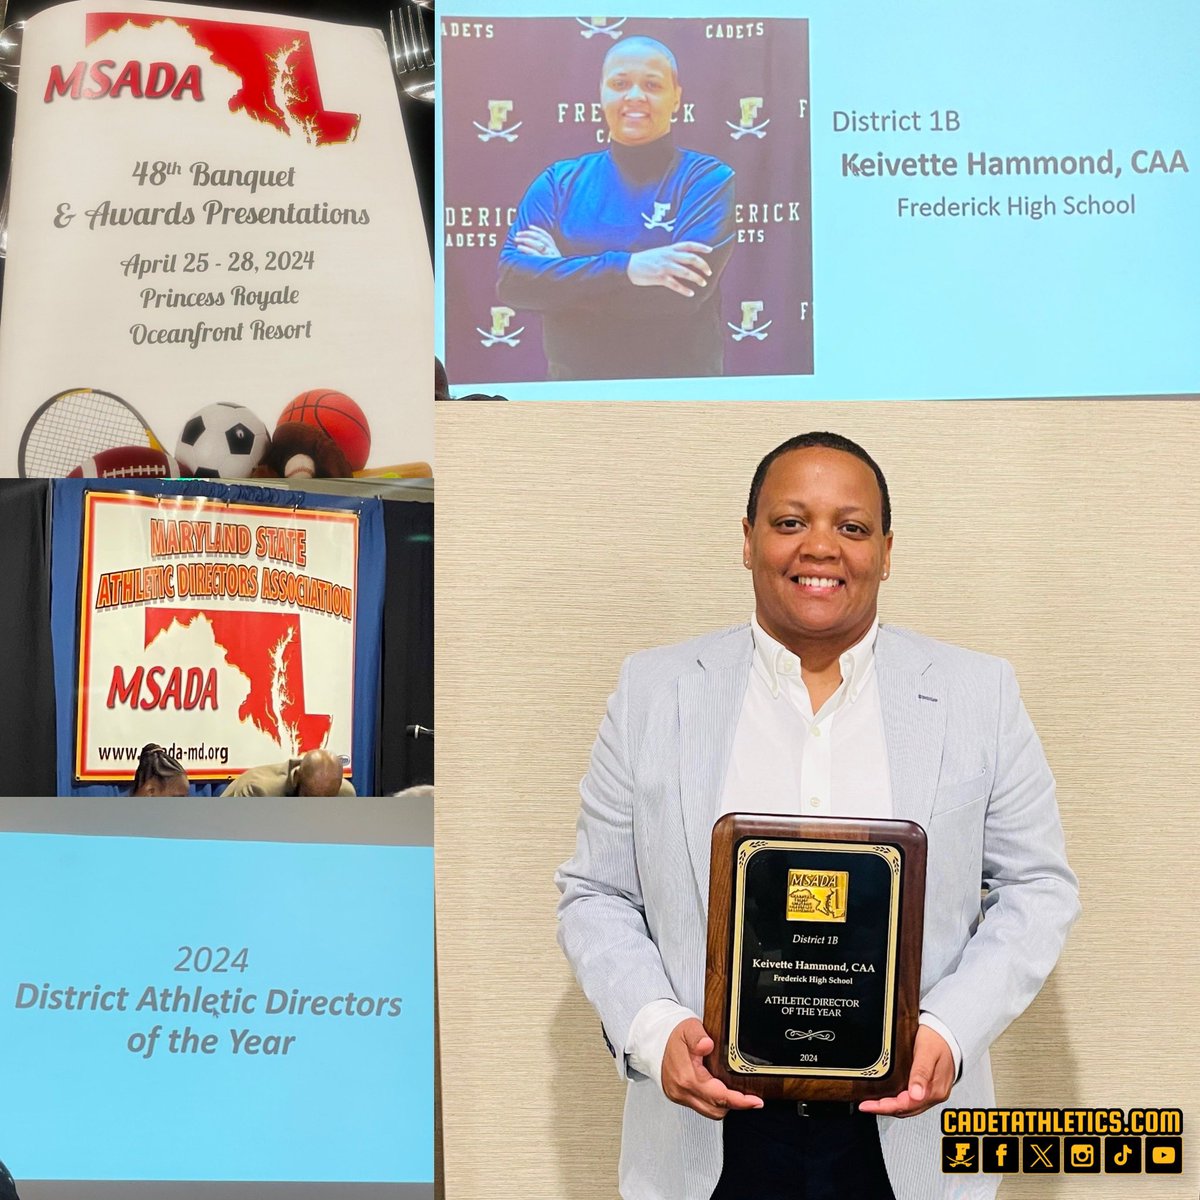 ⚡️Cadetathletics.com Breaking News 
🏆🚨HARDWARE ALERT🚨🏆

FHS’s Keivette Hammond was honored tonight at the MSADA annual banquet in Ocean City, Maryland, where she received her District 1B Athletic Director Of The Year Award. 

⚔️ | #BigFred | ⬛️🟨 | #ProtectTheParkway